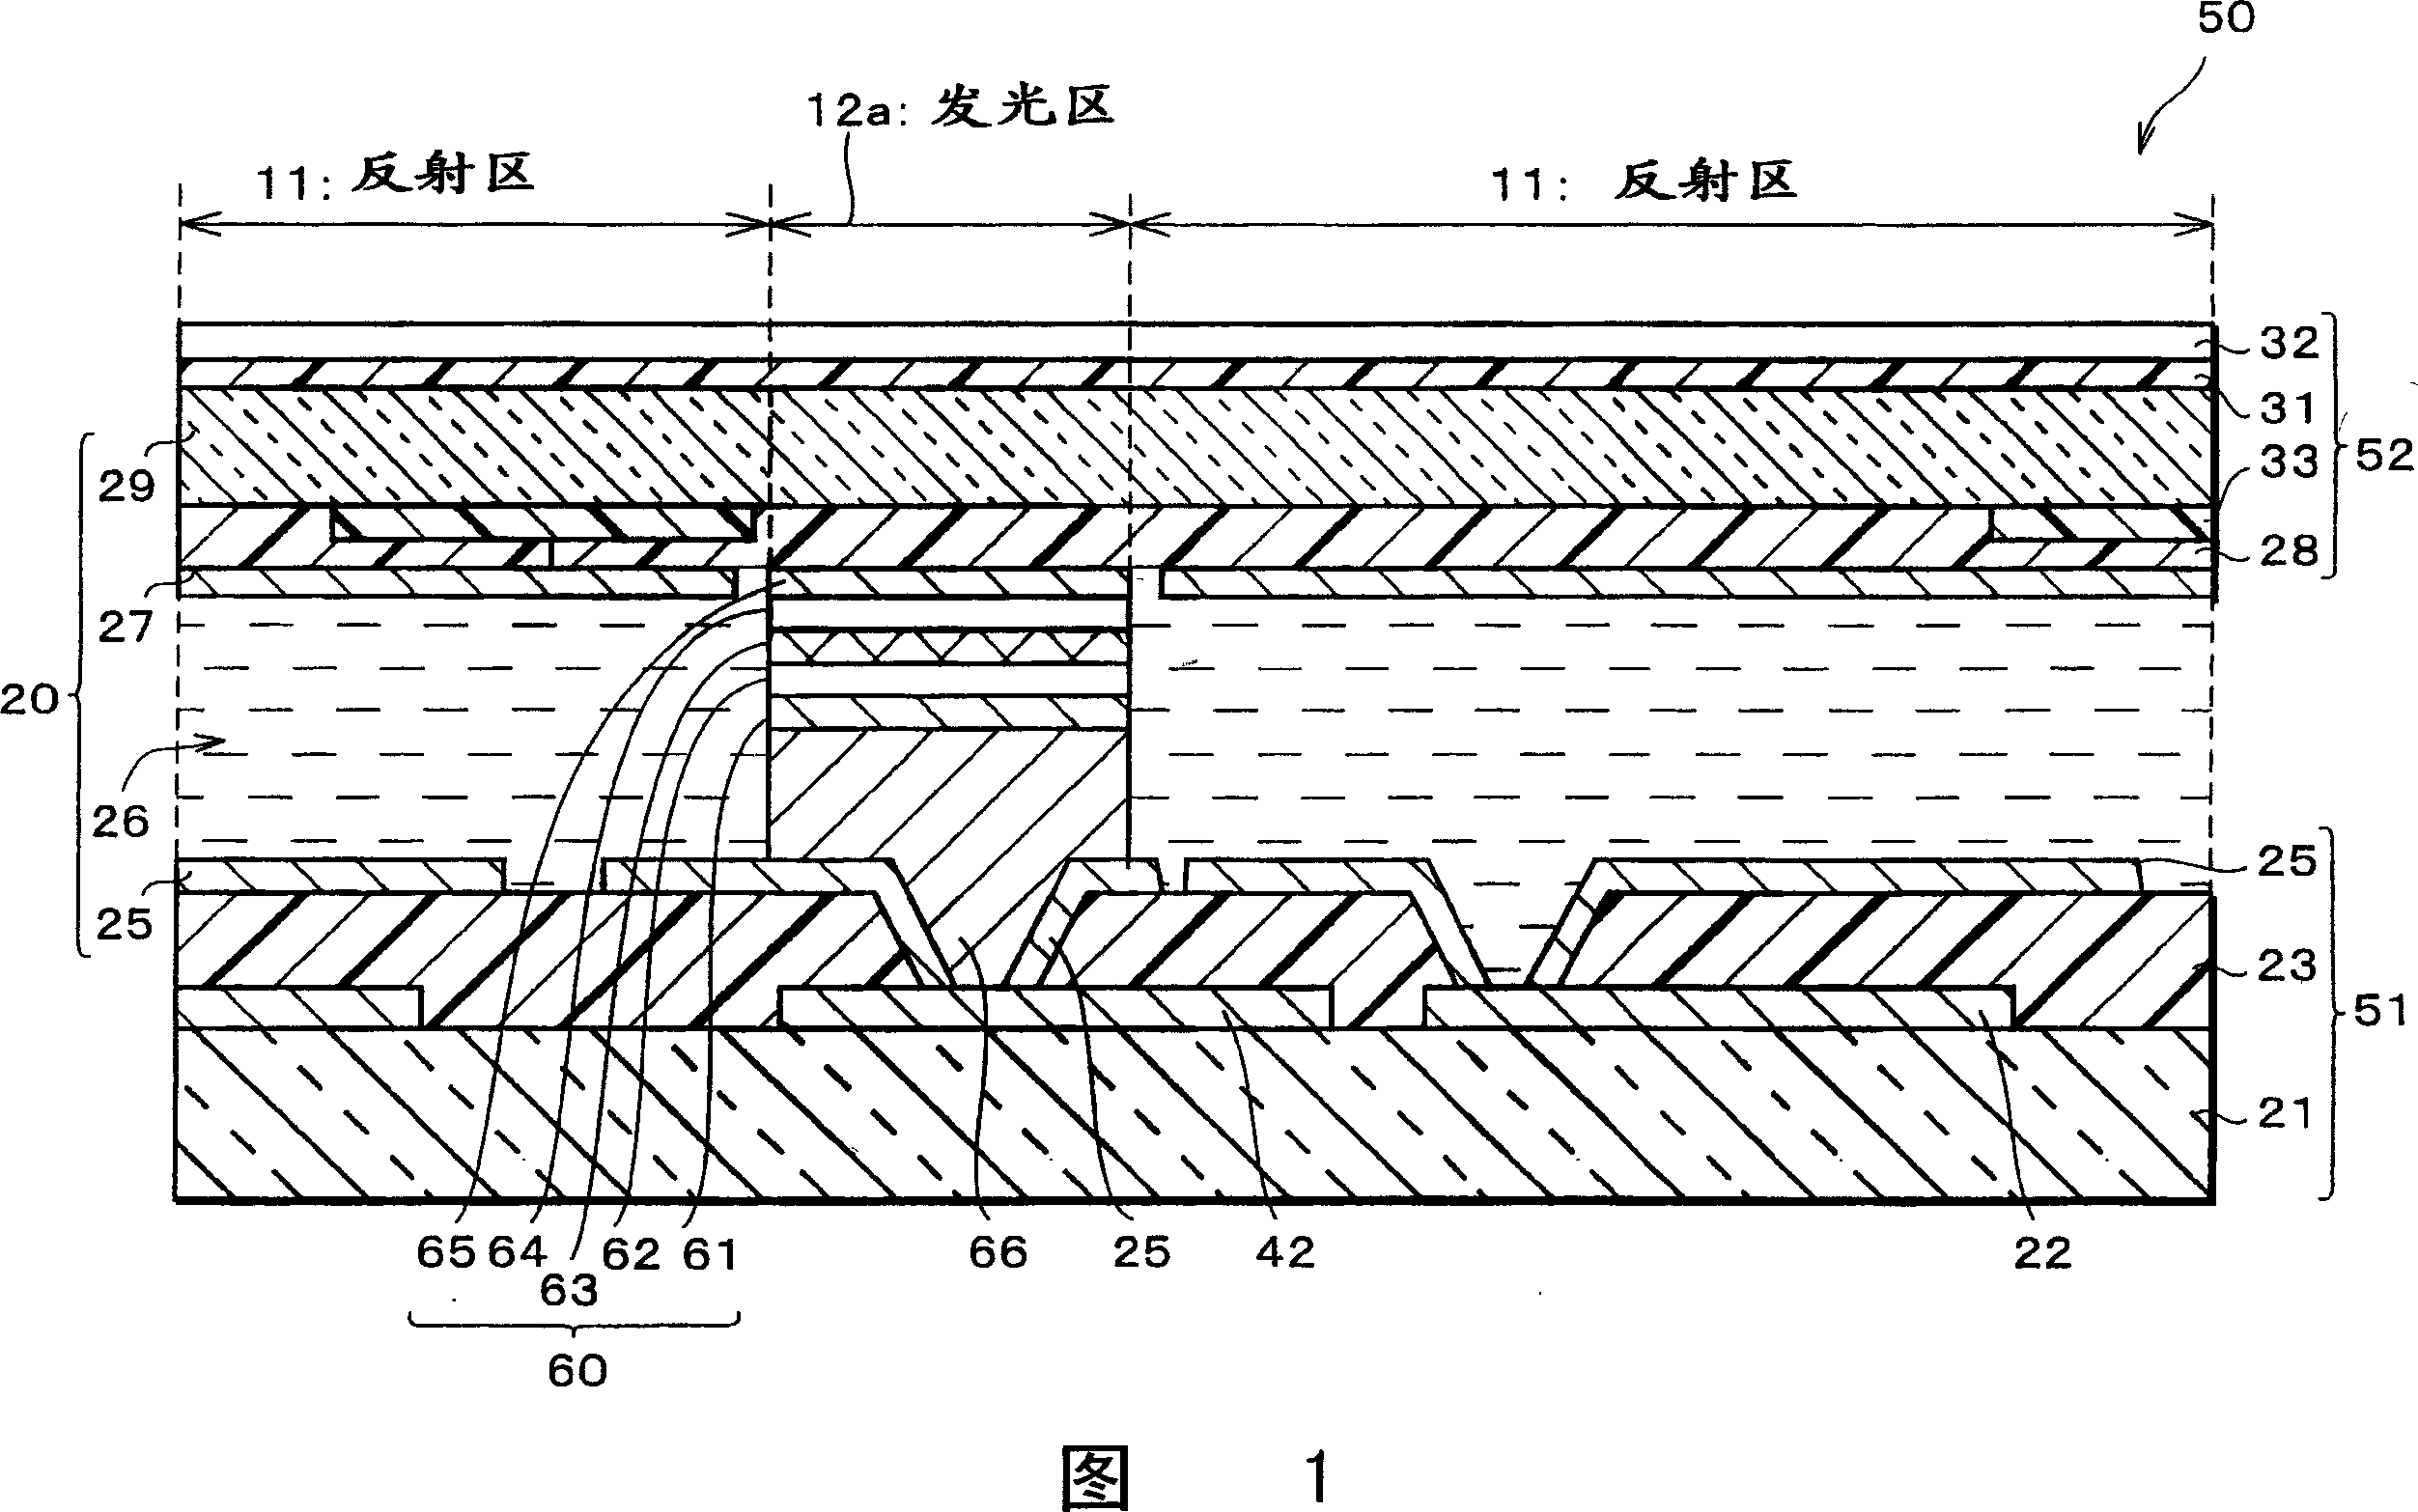 Display apparatus, method for manufacturing and driving the same